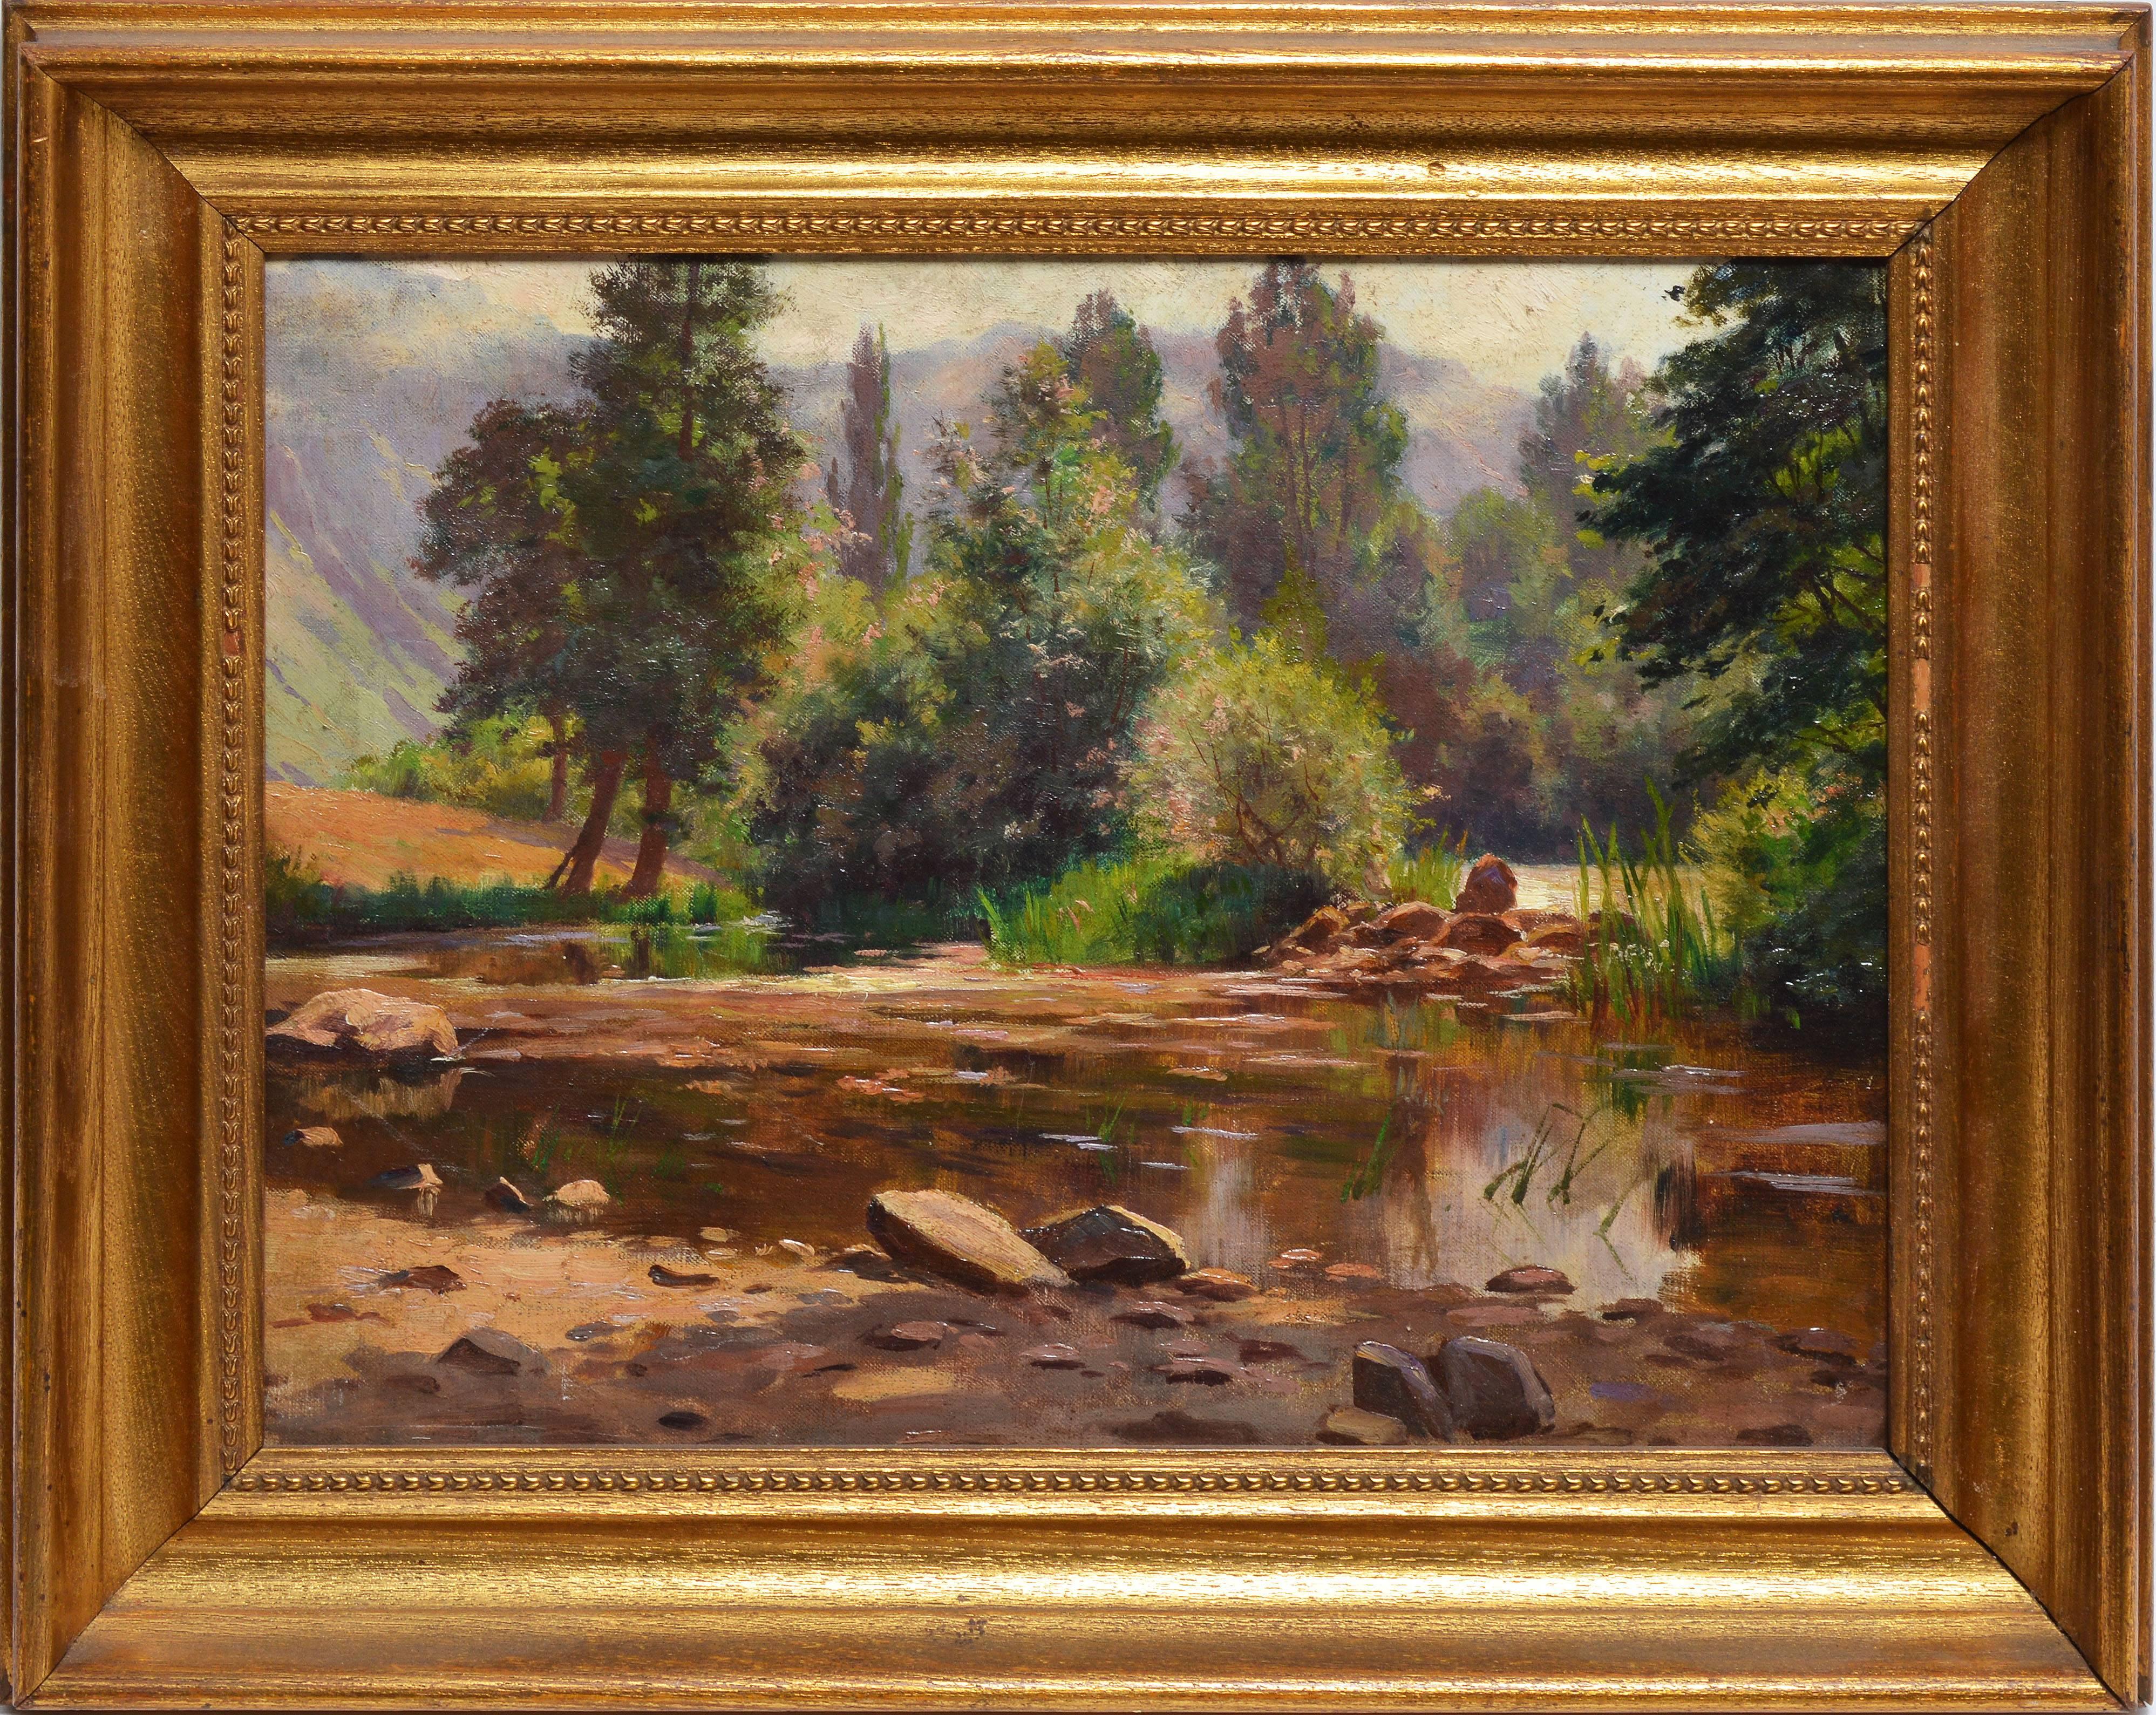 Unknown Landscape Painting - Secluded Forest Landscape Antique Hudson River School Oil Painting